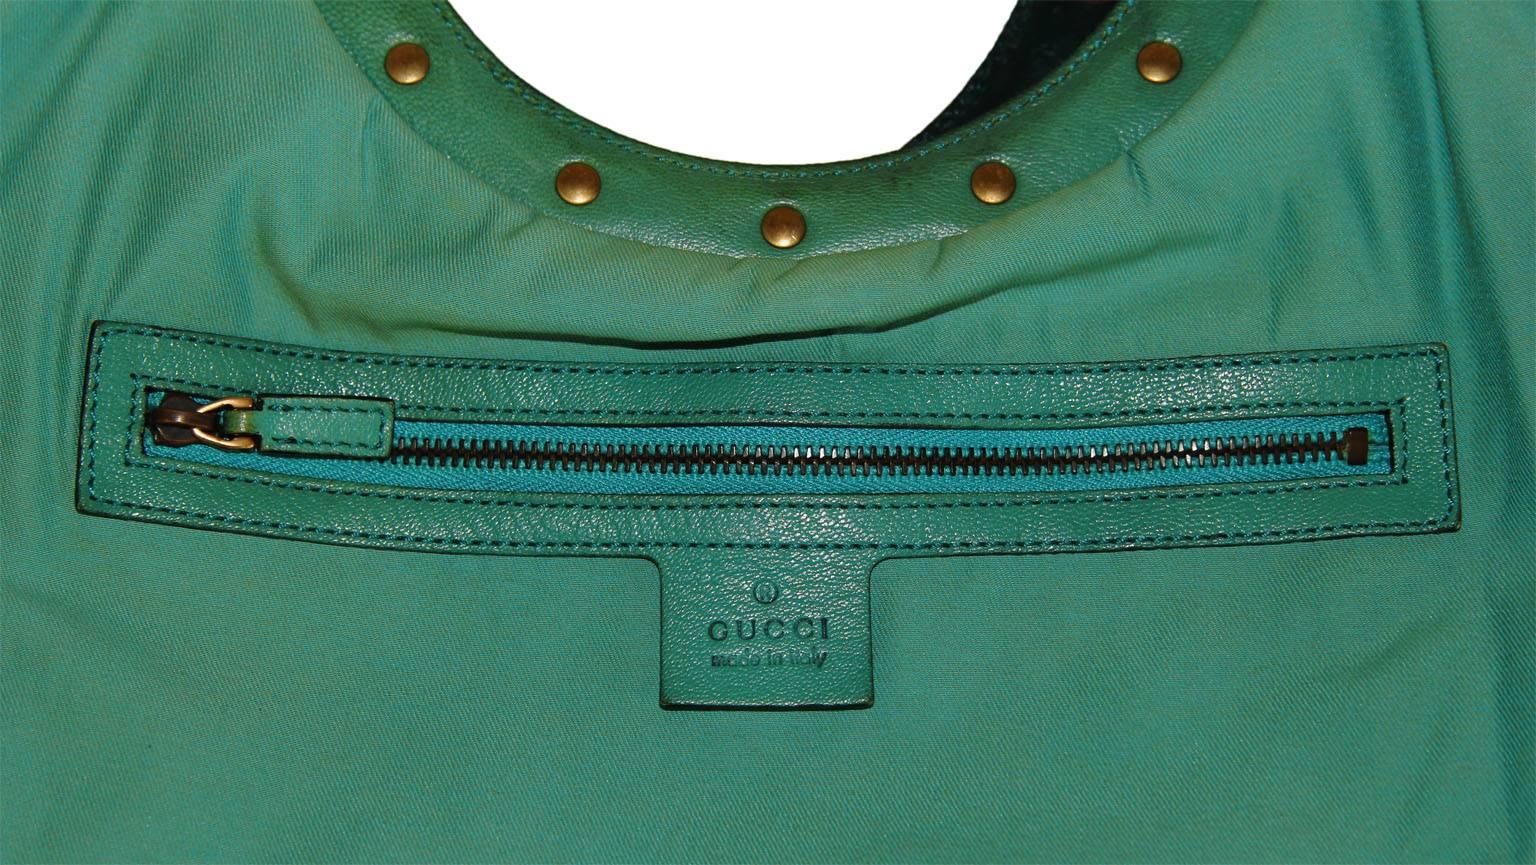 Uber-Rare Tom Ford For Gucci Spring Summer 2004 Forest Green Leather Runway Bag!

So many of Tom Ford's incredible runway collections for Gucci & YSL will forever hold a place in fashion history, as well as in people's hearts, for the